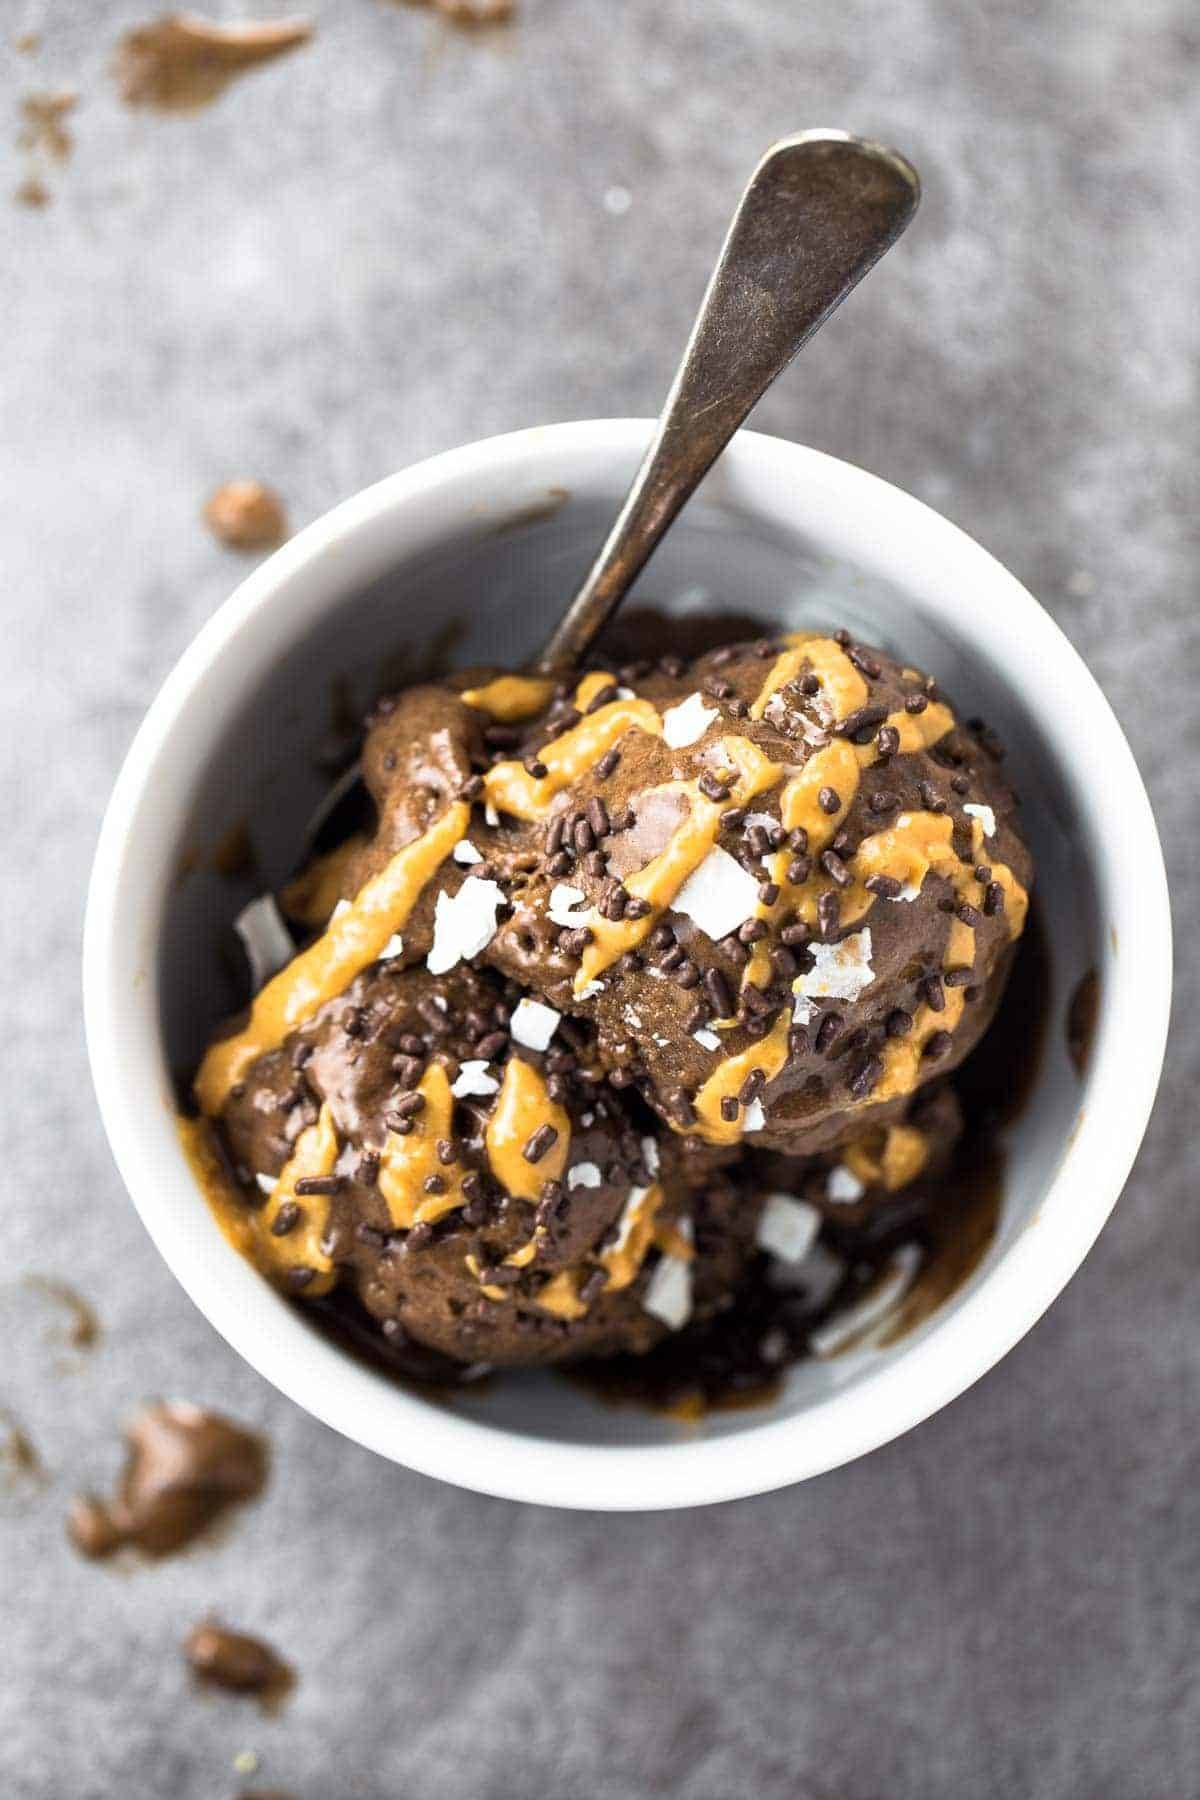 This naturally sweet ice cream is made with ALOHA superfood chocolate and bananas! You won't believe it's only 3 ingredients and 5 minutes to make! | pinchofyum.com